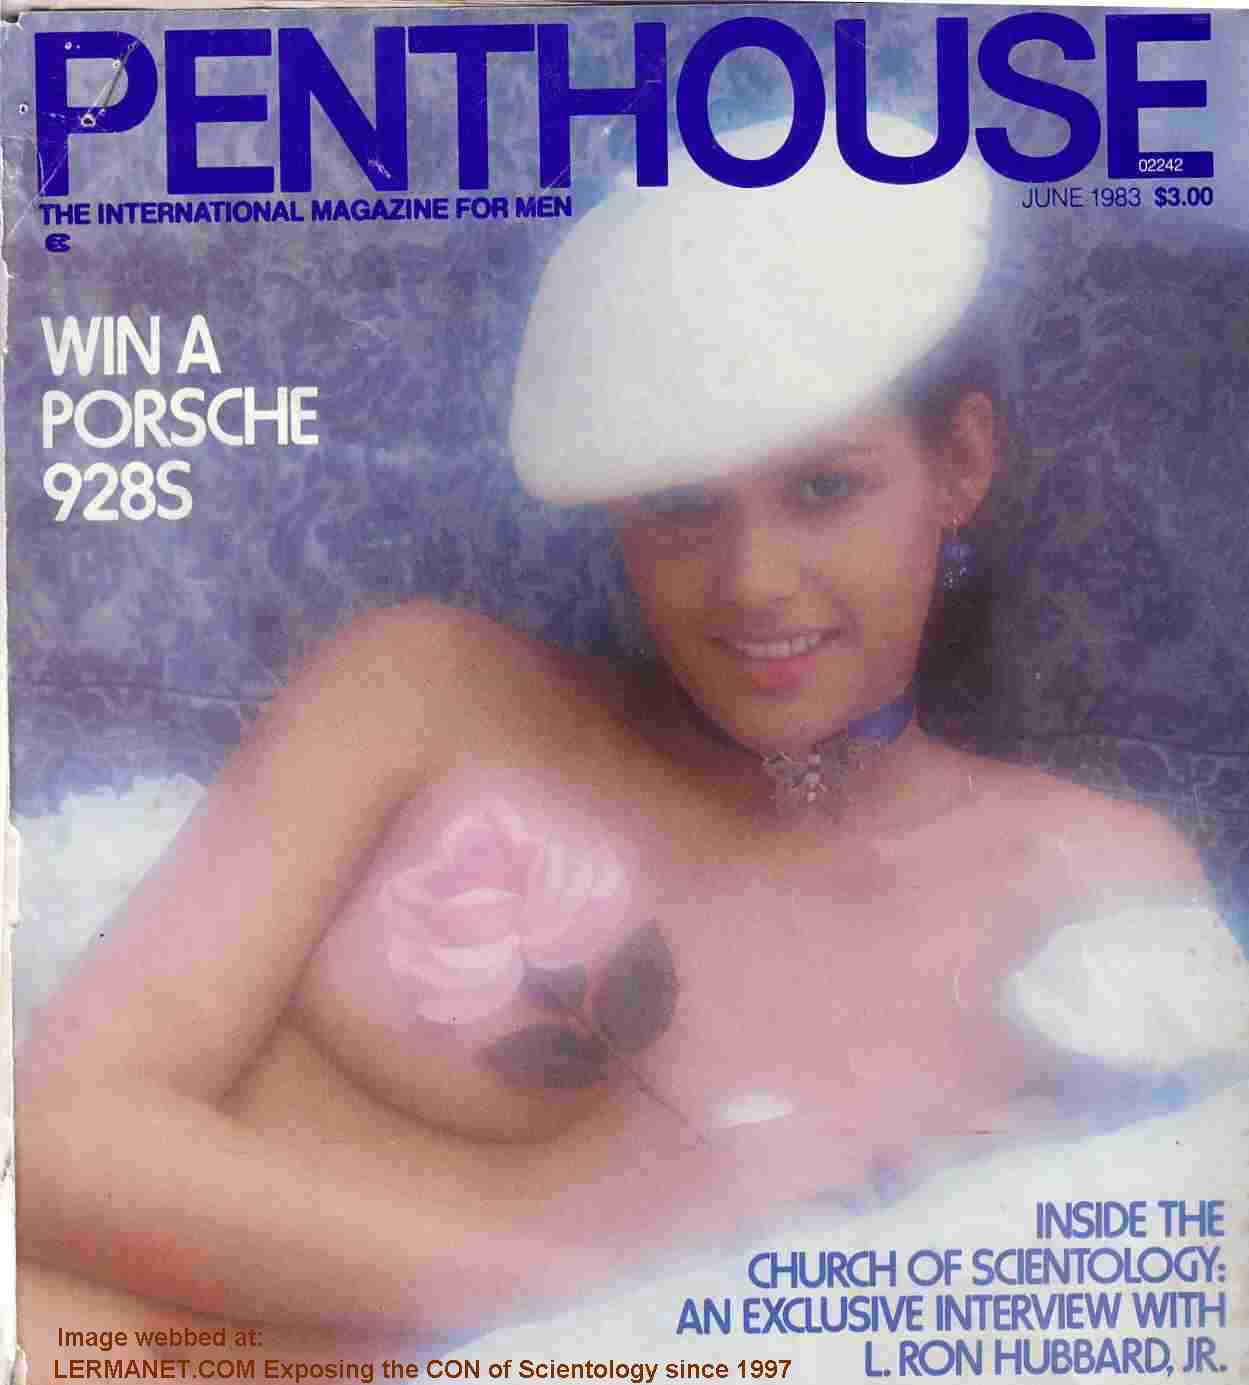 top 4/5ths of June 1983 Penthouse Magazine - INSIDE THE CHURCH OF SCIENTOLOGY AN EXCLUSIVE INTERVIEW WITH L.RON HUBBARD, JR